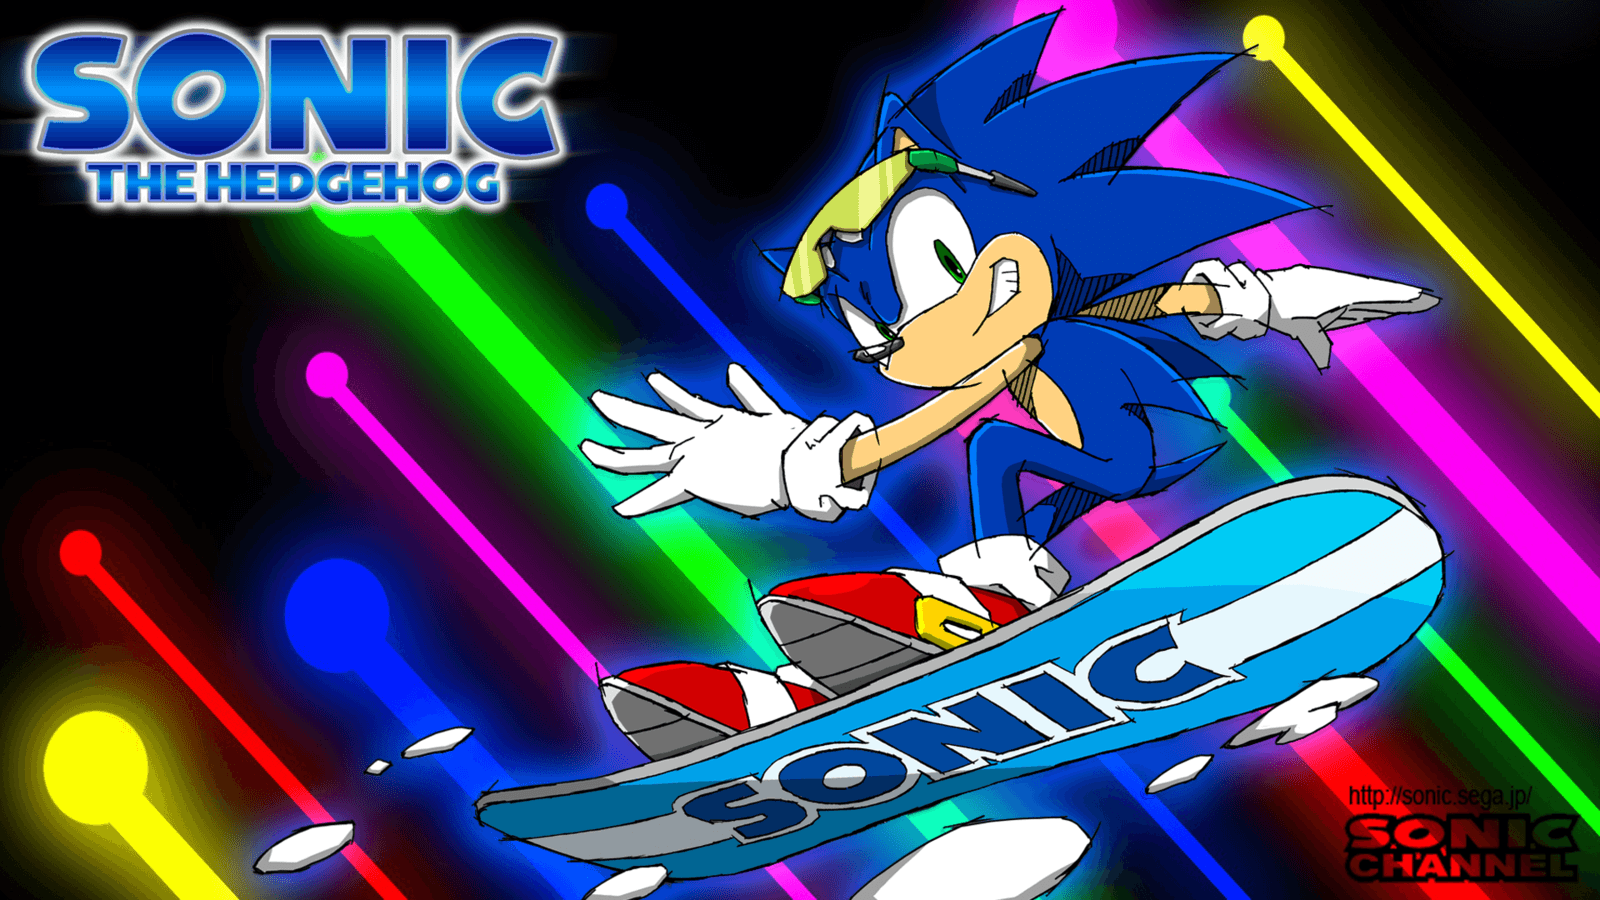 Hyper Sonic The Hedgehog Wallpapers - Wallpaper Cave